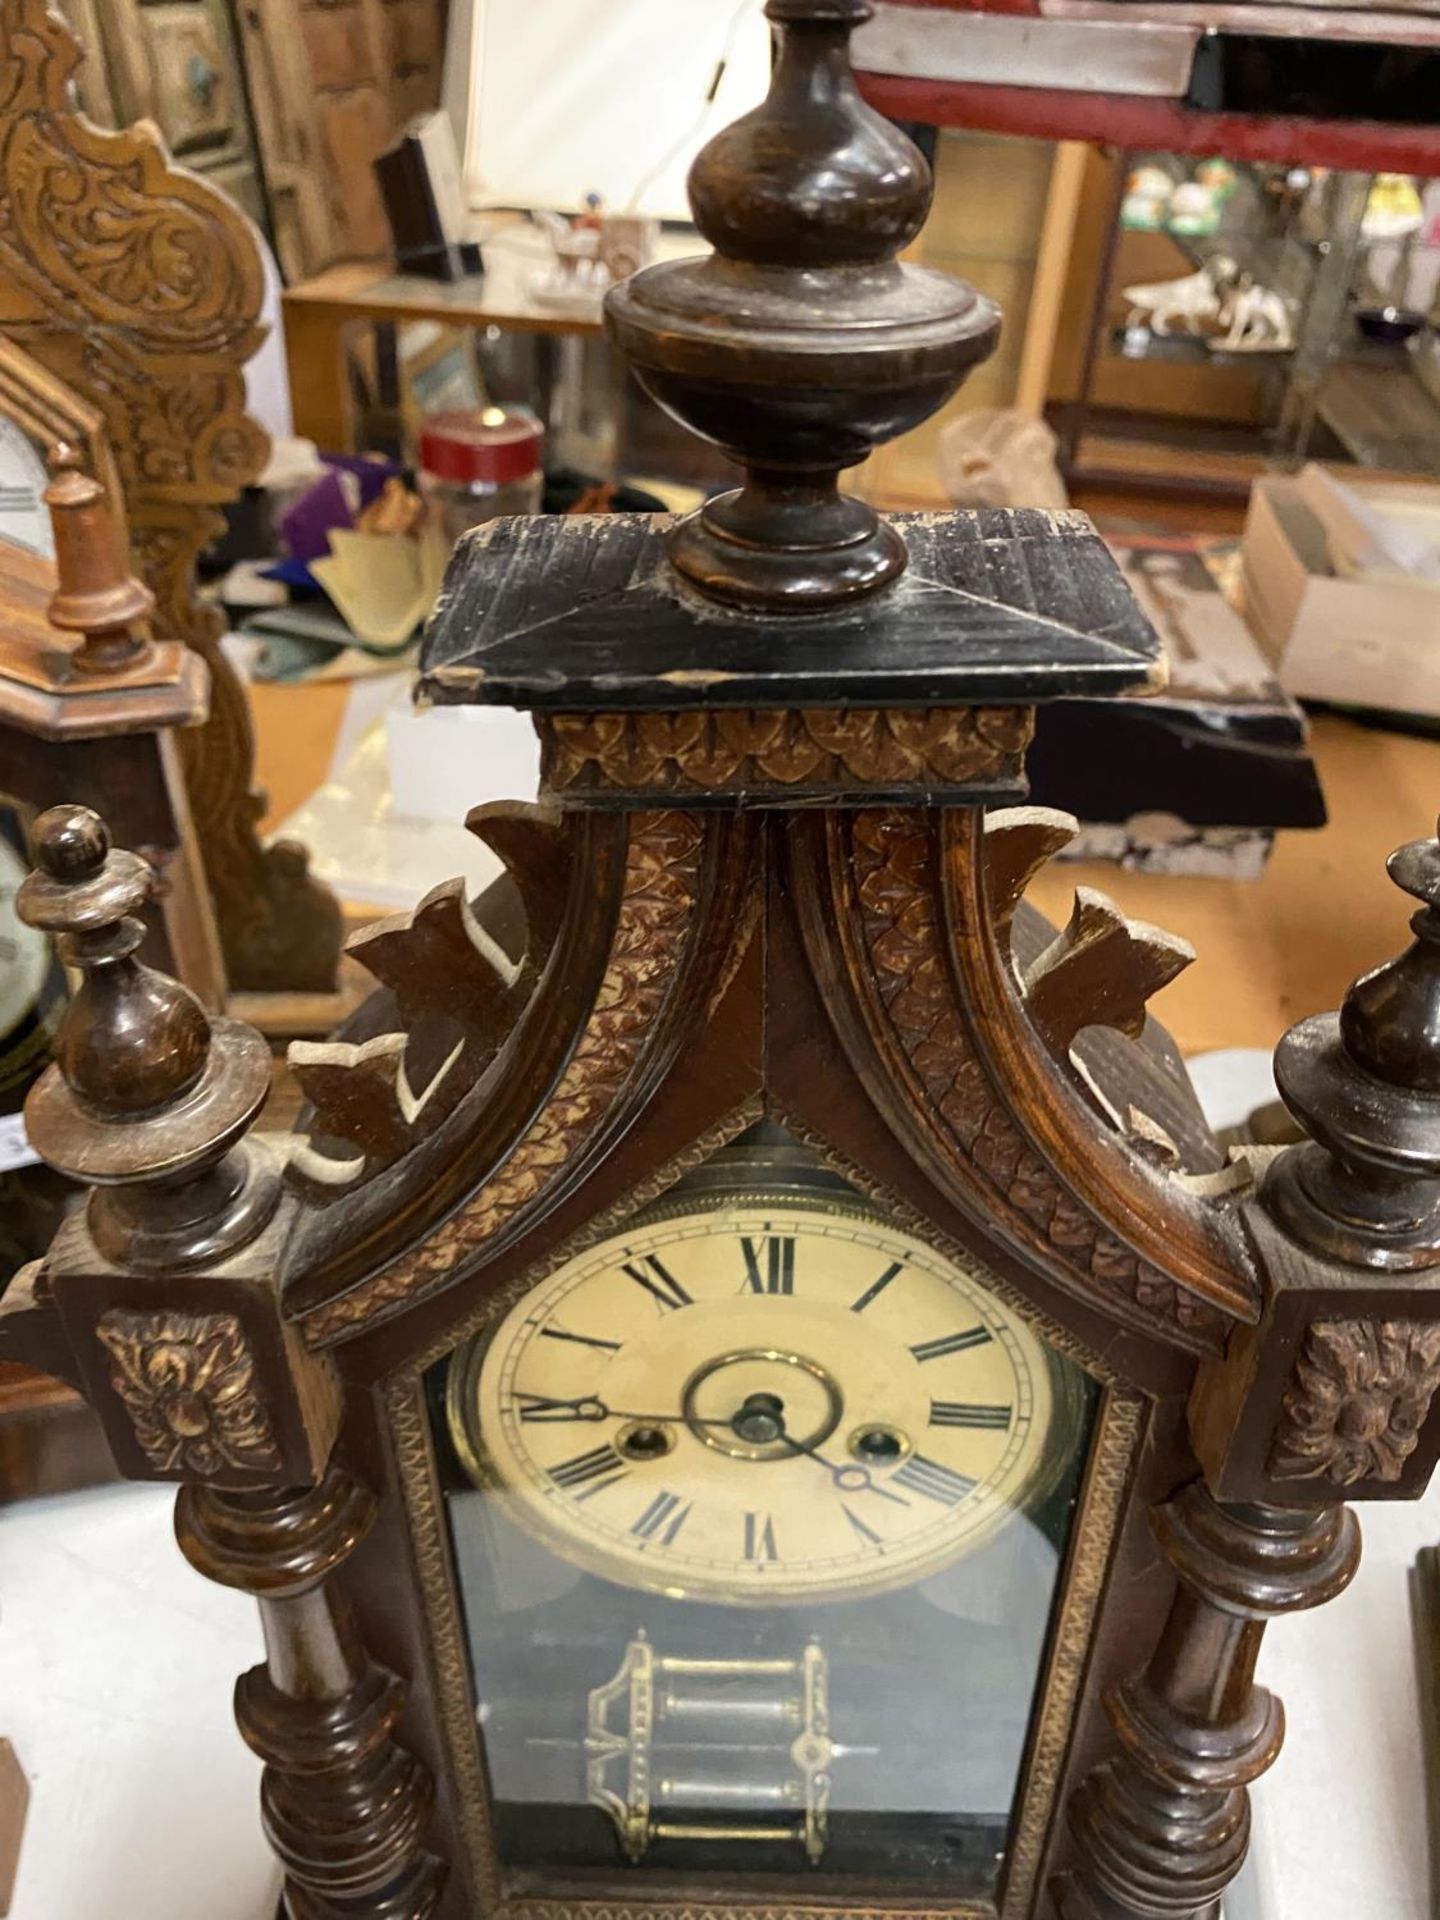 A VINTAGE AMERICAN CLOCK IN A GOTHIC STYLE WOODEN CASE - Image 3 of 6